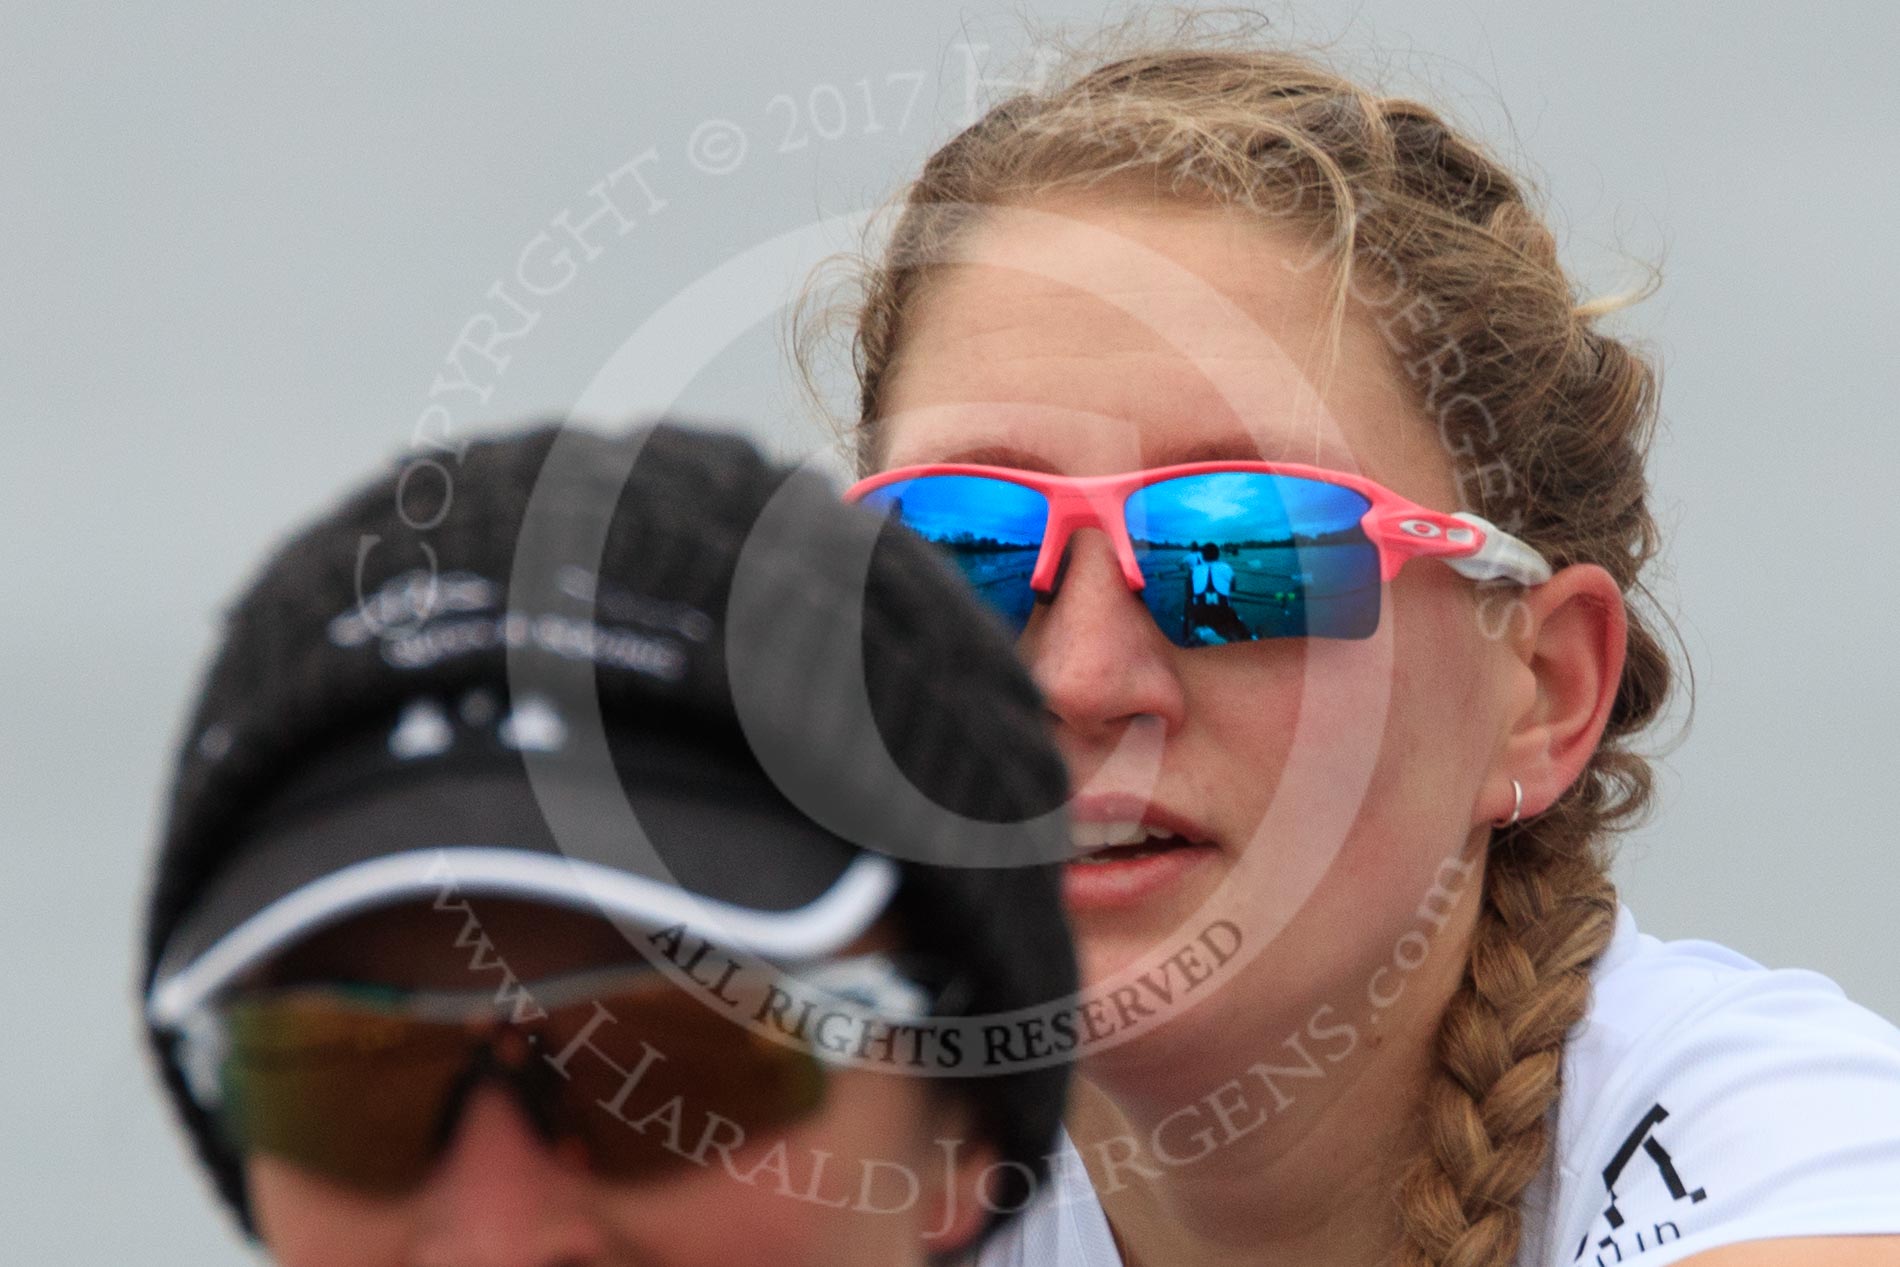 The Women's Boat Race season 2018 - fixture OUWBC vs. Molesey BC: Molesey's 3 seat Gabby Rodriguez and  2 Lucy Primmer, with the boat mirrored in her sunglasses.
River Thames between Putney Bridge and Mortlake,
London SW15,

United Kingdom,
on 04 March 2018 at 13:49, image #74